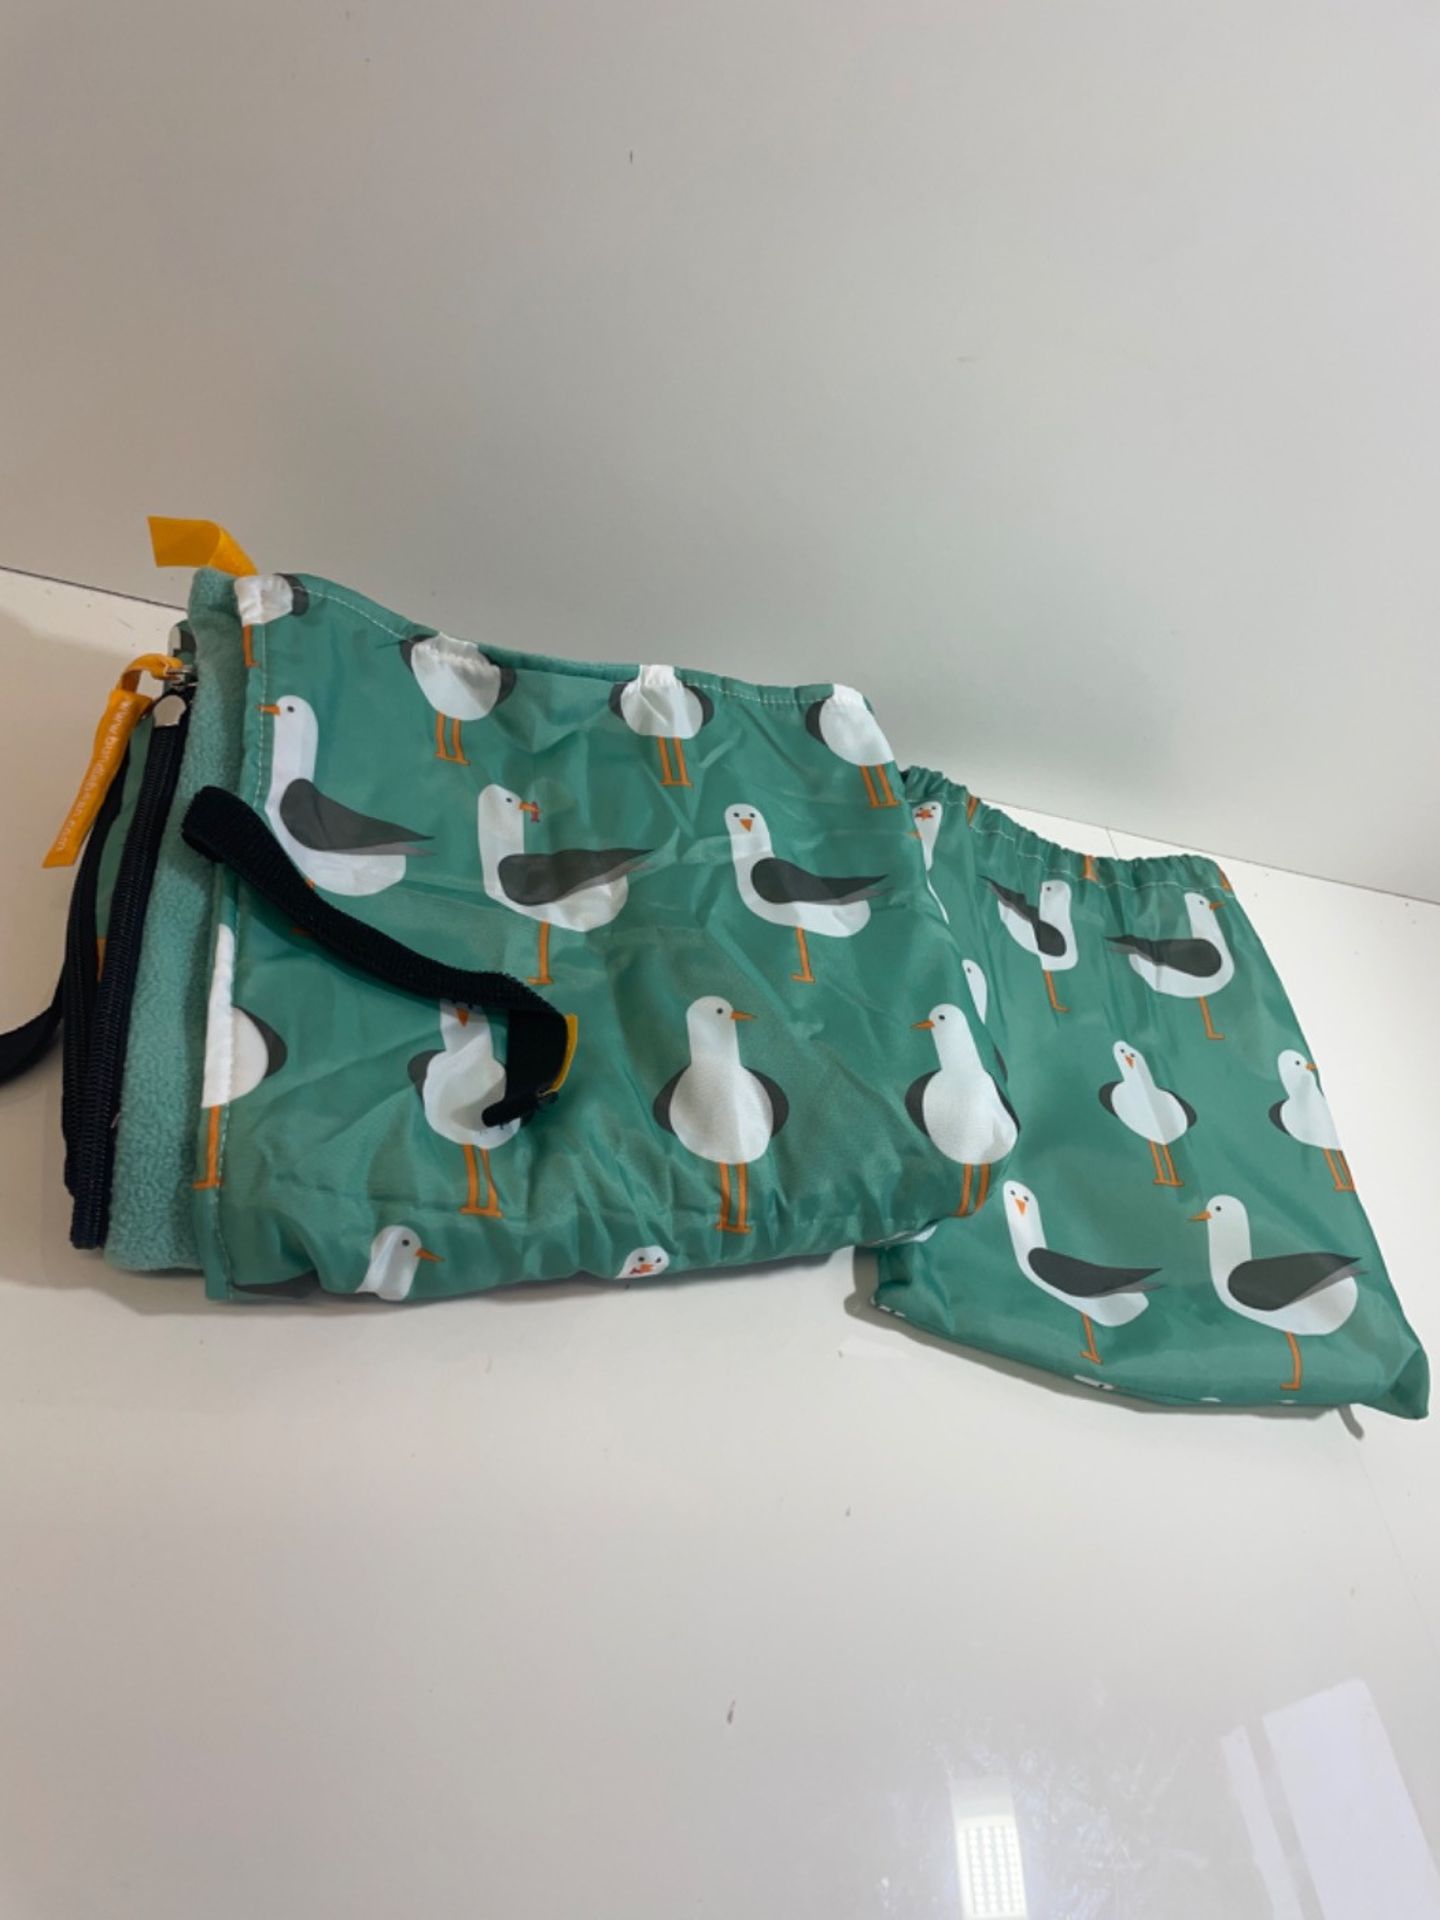 BundleBean - GO Multi-use Footmuff - Use as Car Seat Cover or Pushchair Cover - Opens as Playmat -  - Image 2 of 2